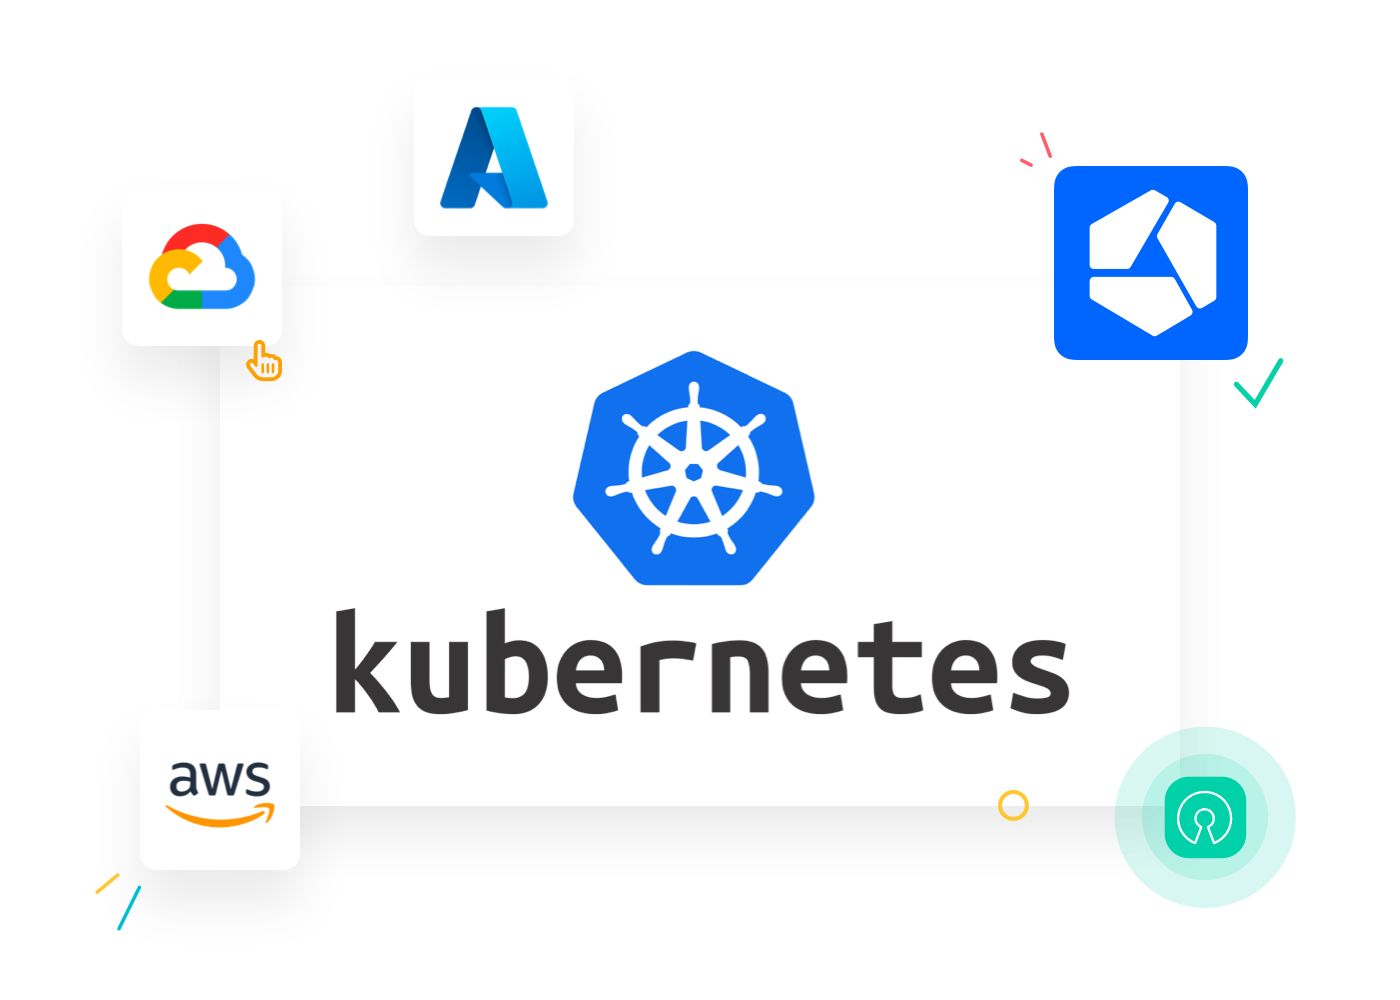 Because Kubernetes is an Open Source project, it runs on every cloud platform.